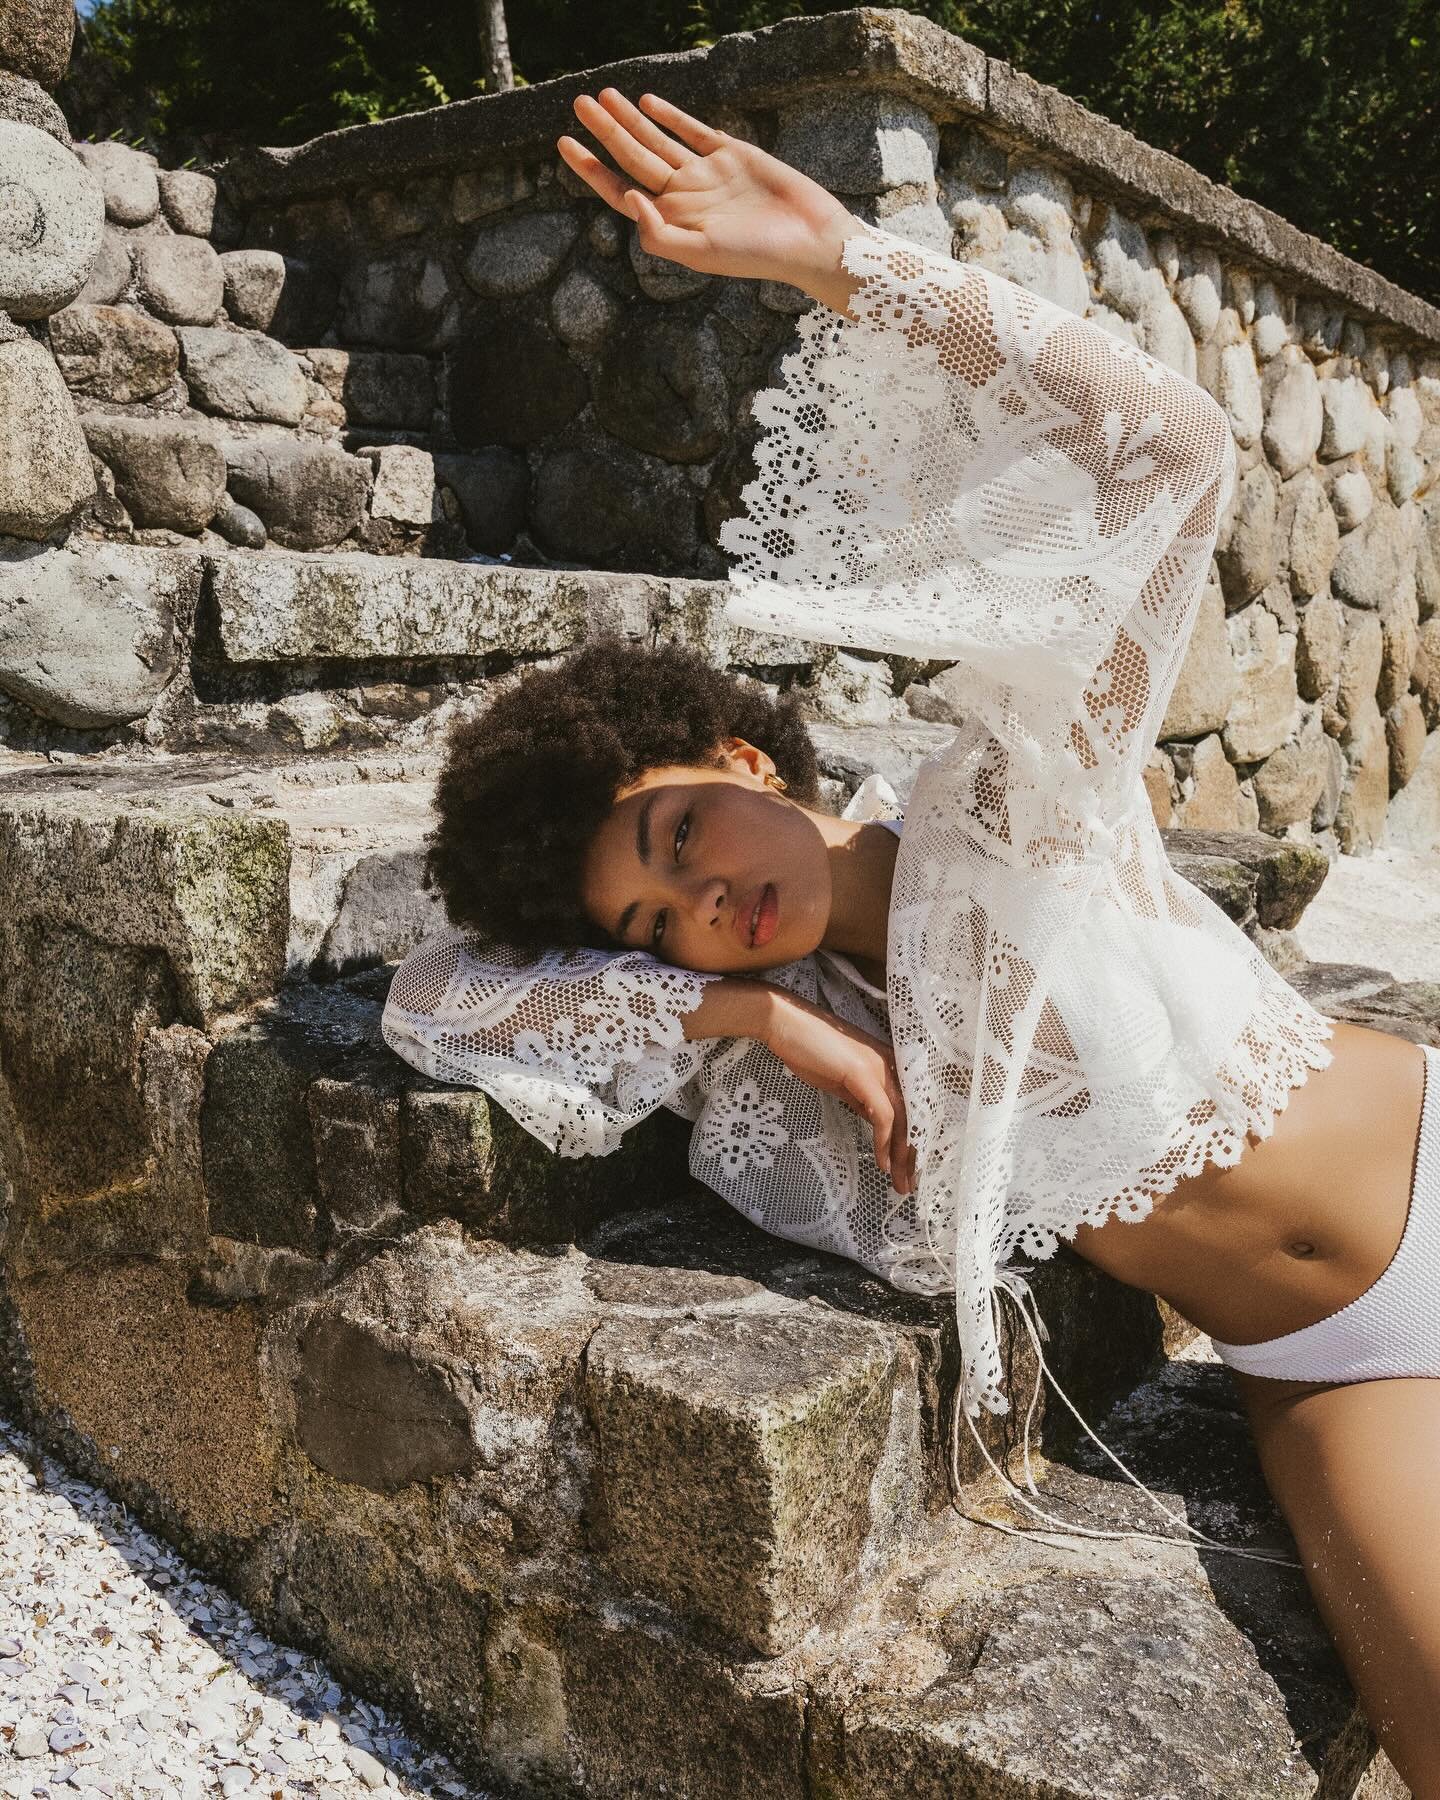 Cove Daze with @anorushka @lizbellagency 
Shot and styled by me
Assist by @emmadianaphoto